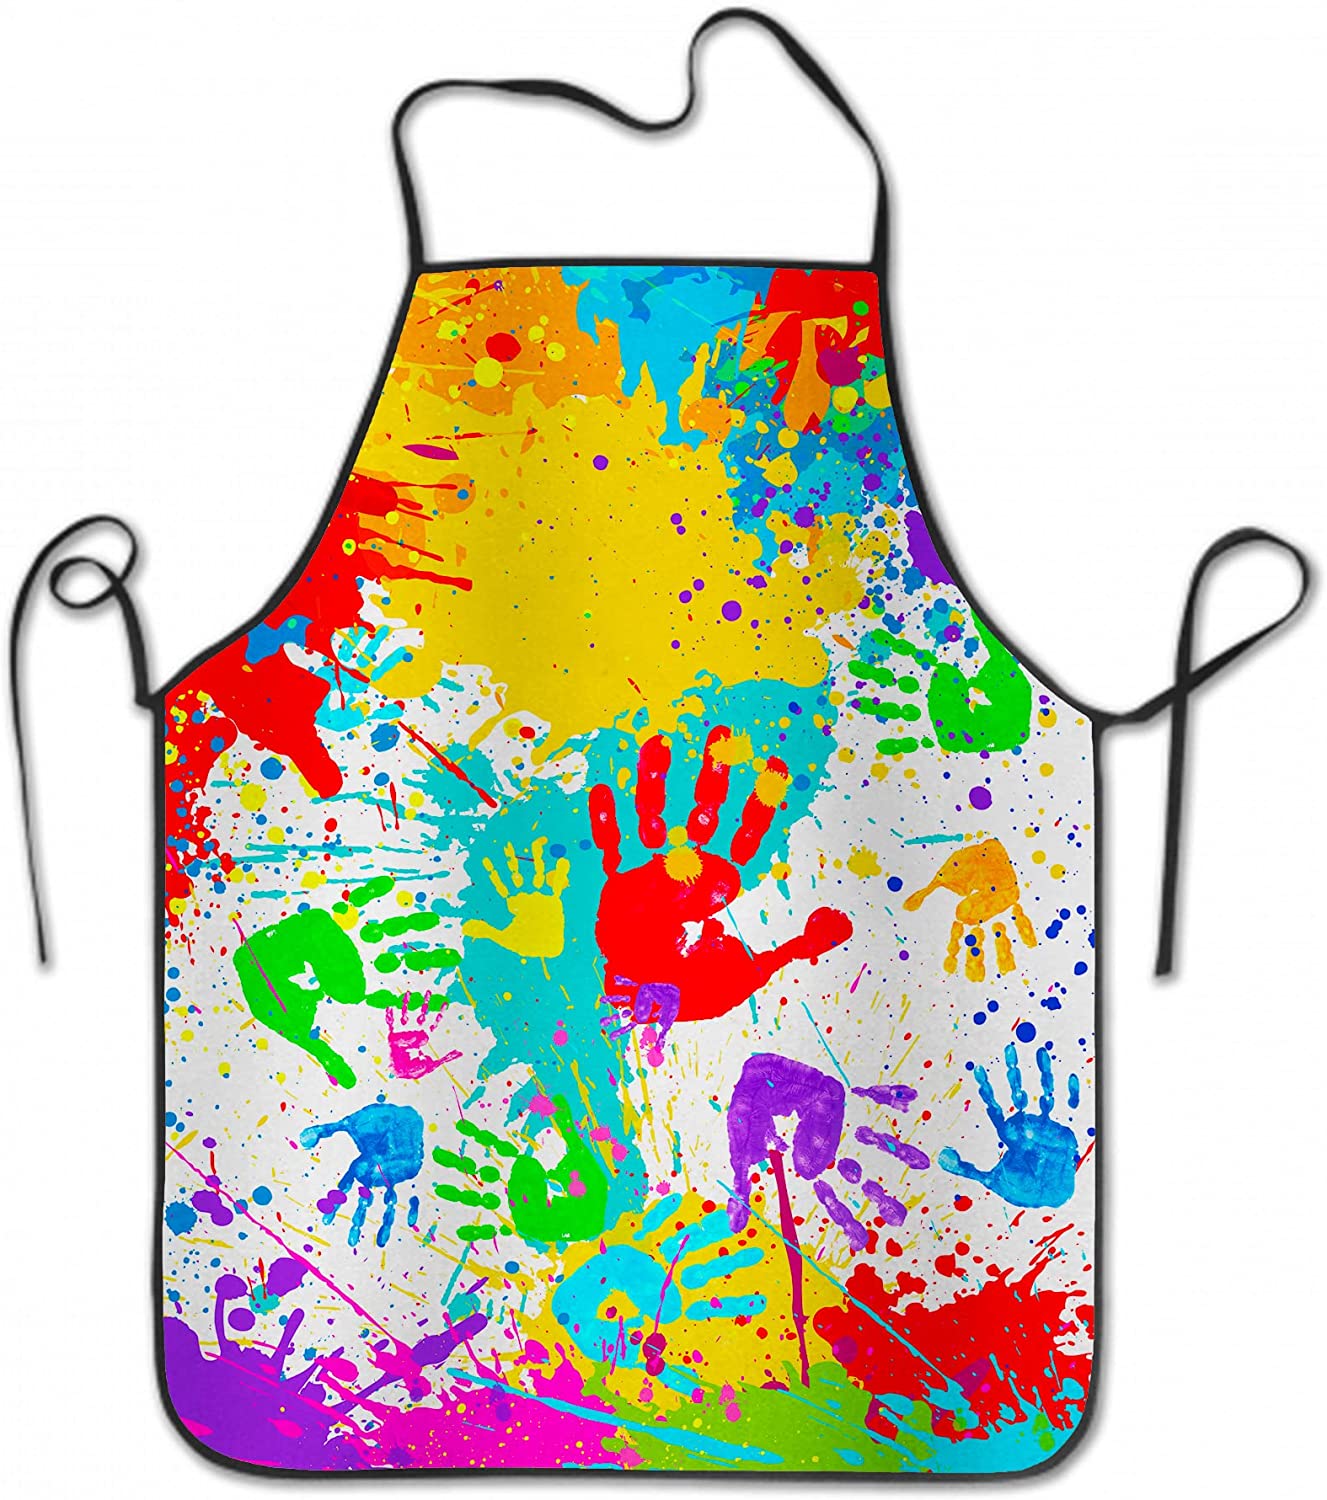 FreeNFond Adjustable Artist Apron with Pockets for Women Men Canvas  Painting Aprons for Arts Gardening Utility or Work